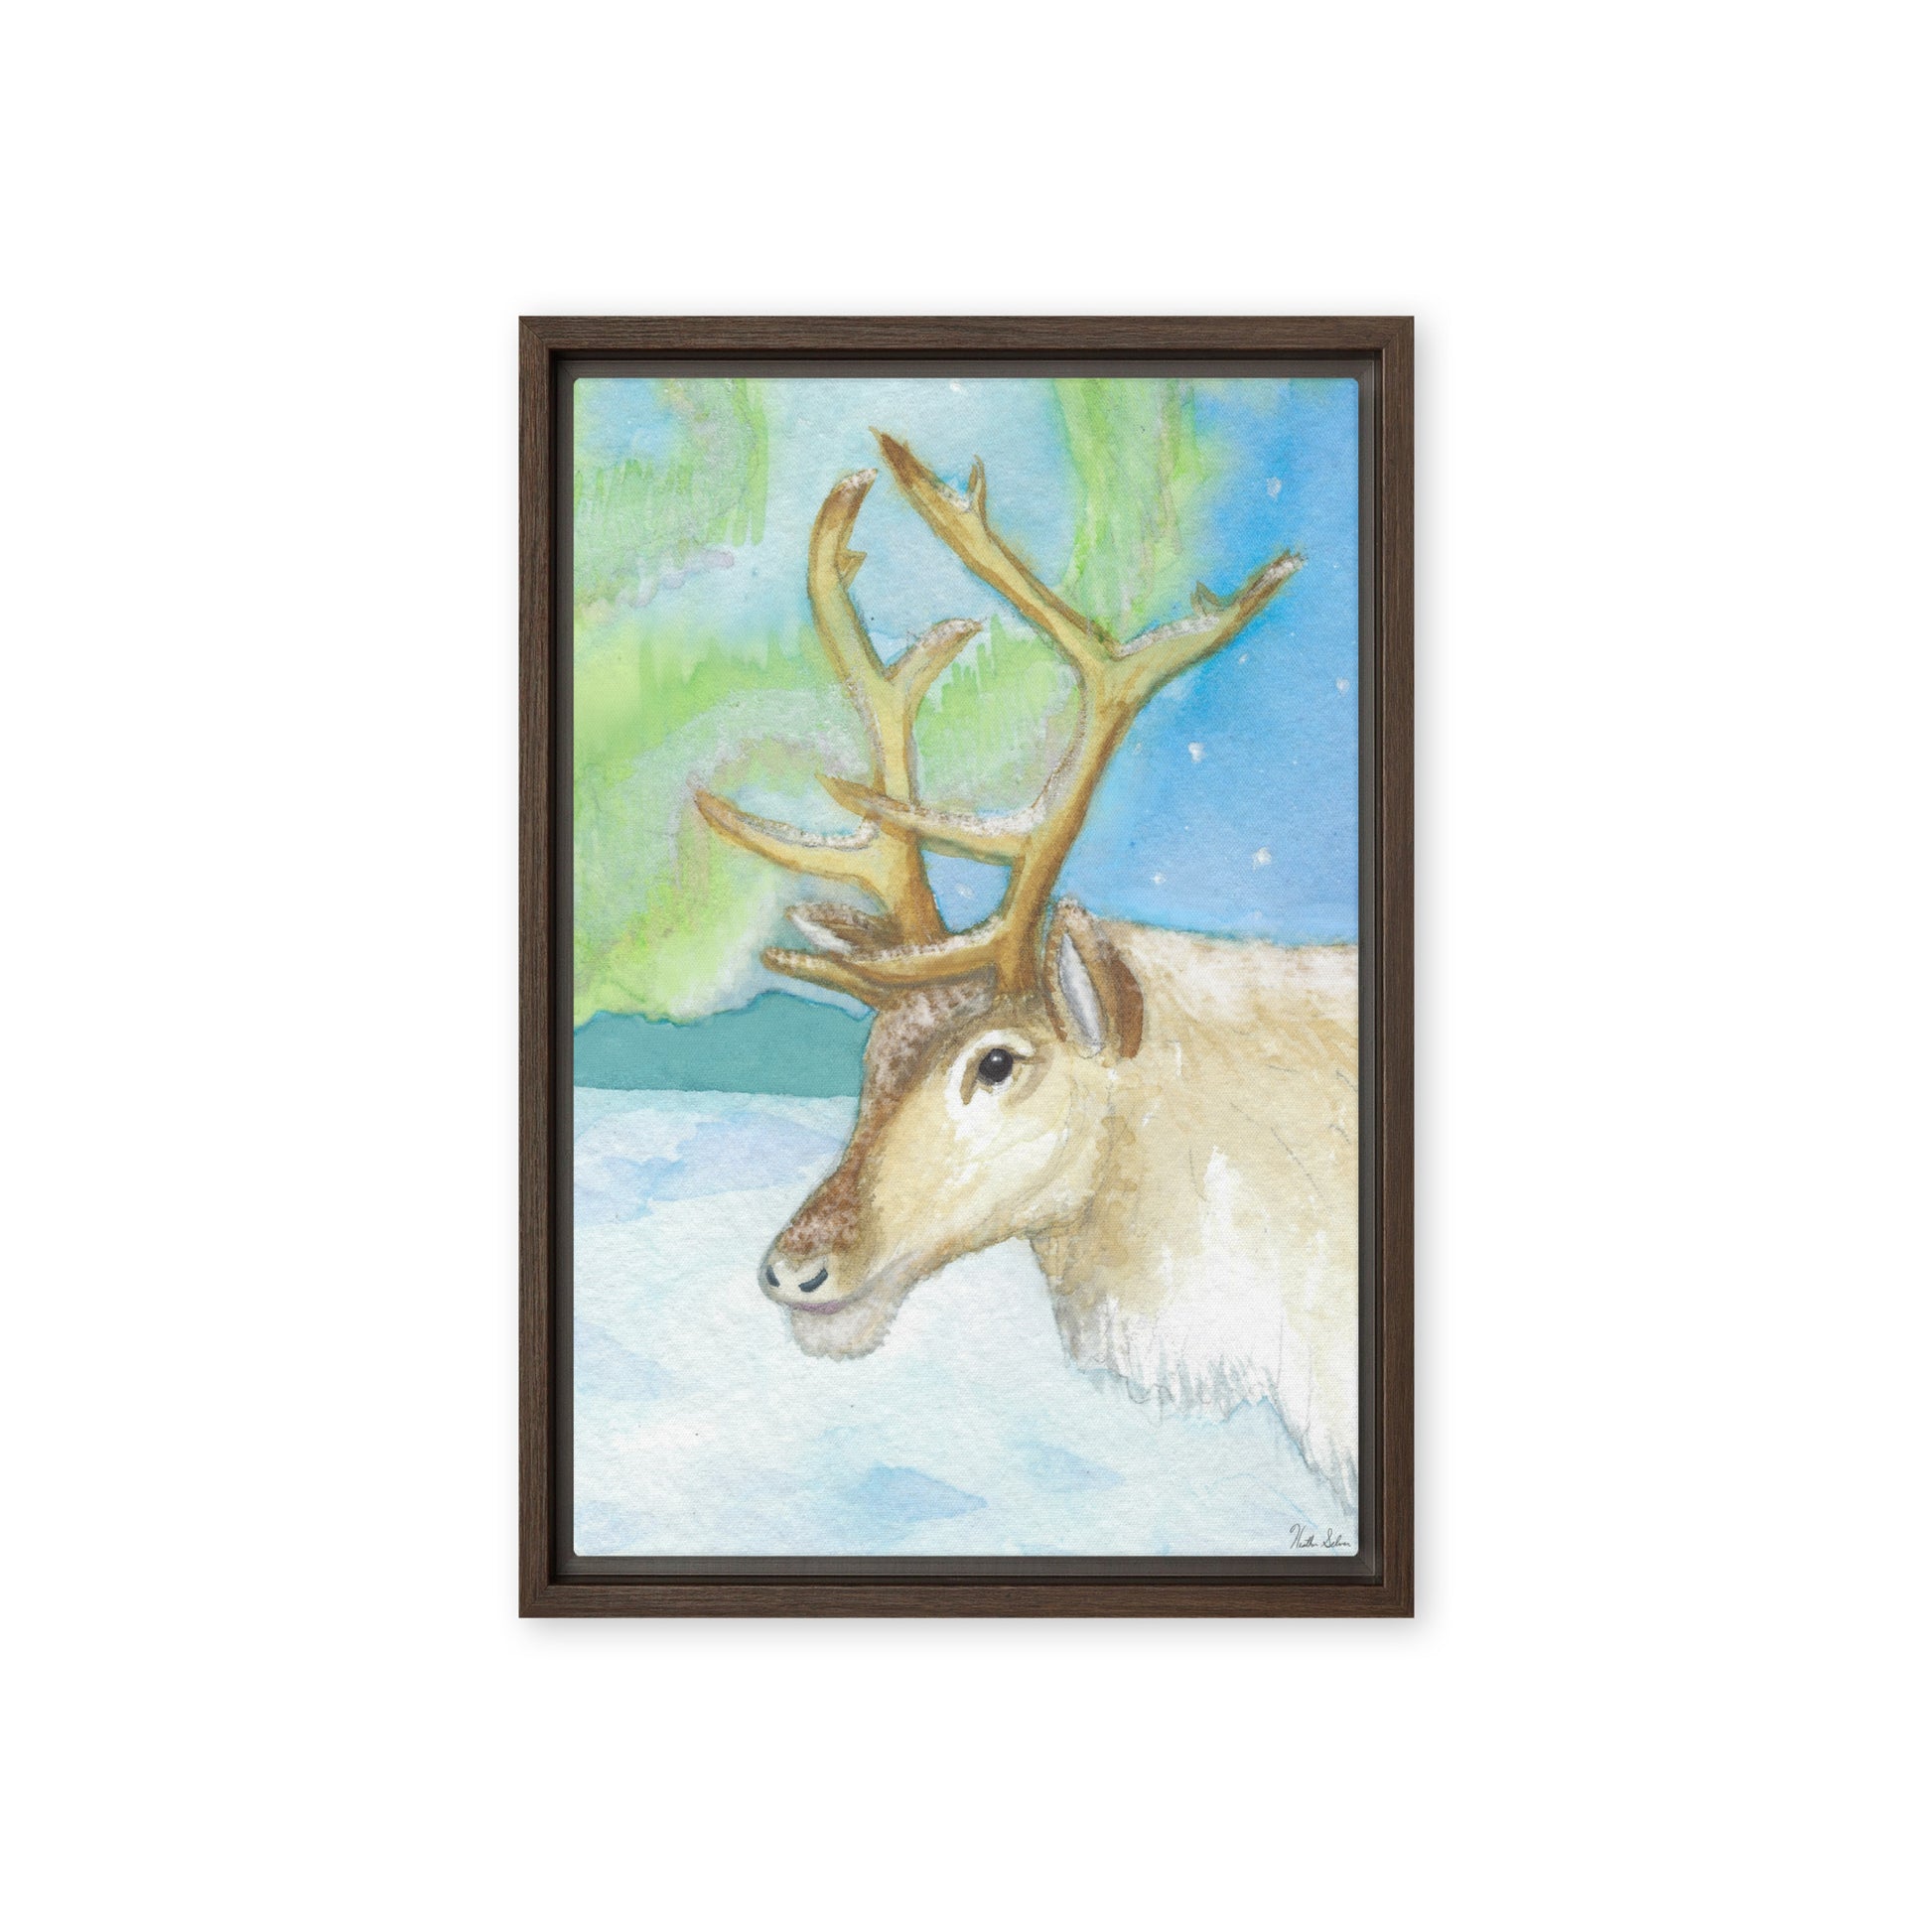 12 by 18 inch framed canvas art print of Heather Silver's Northern Lights Reindeer.  Canvas print mounted in a brown pine frame. Hanging hardware included.